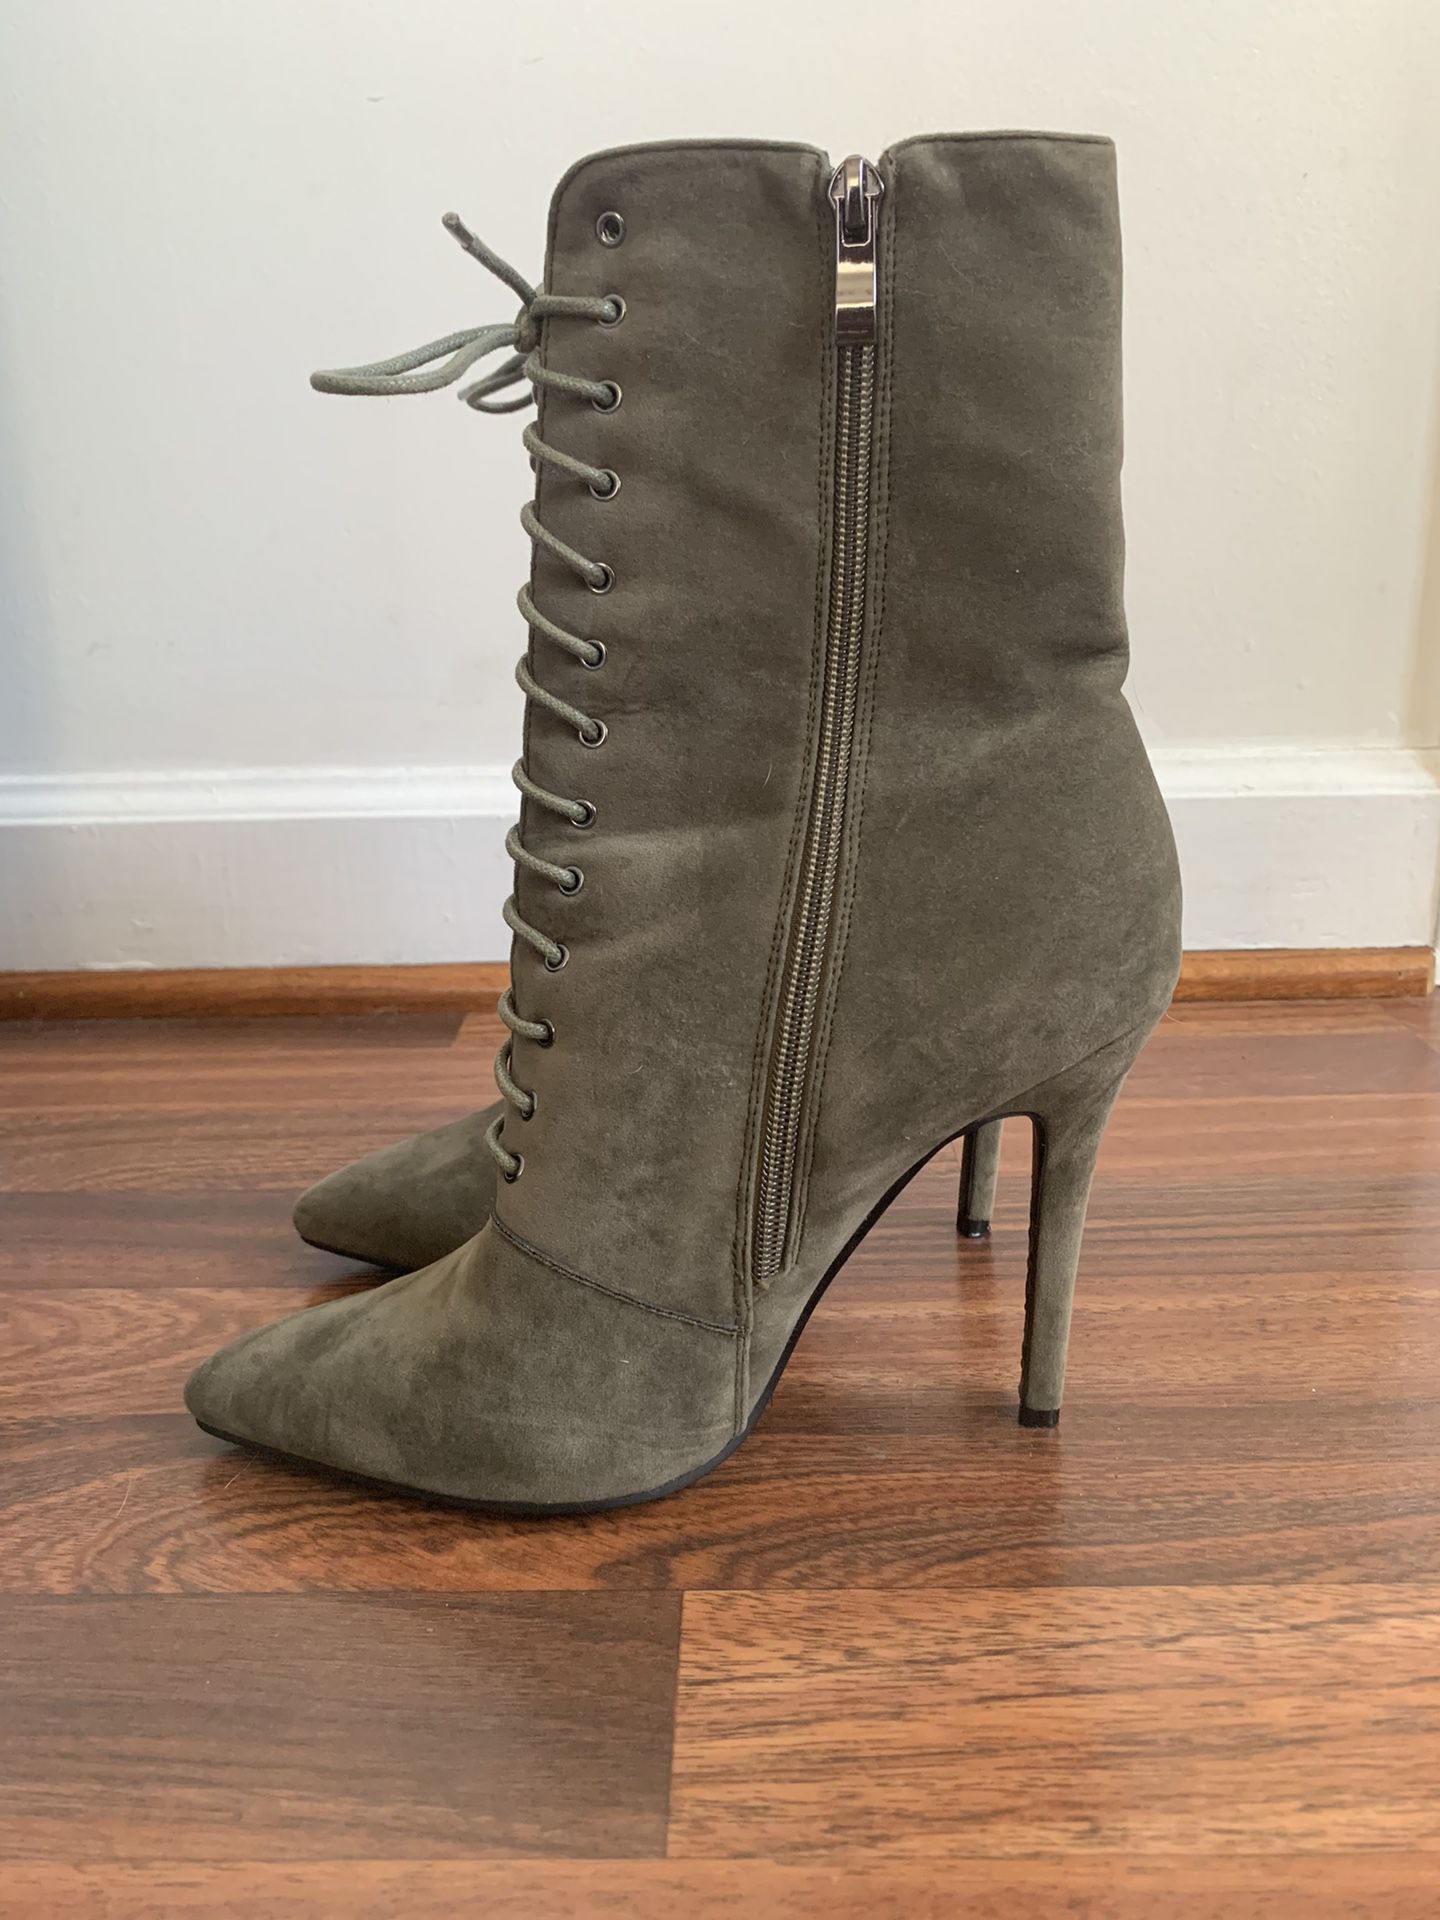 Aaliyah Olive Green Suede Lace Up Pointed Stiletto Boots Simmi Shoe/boots Size 7